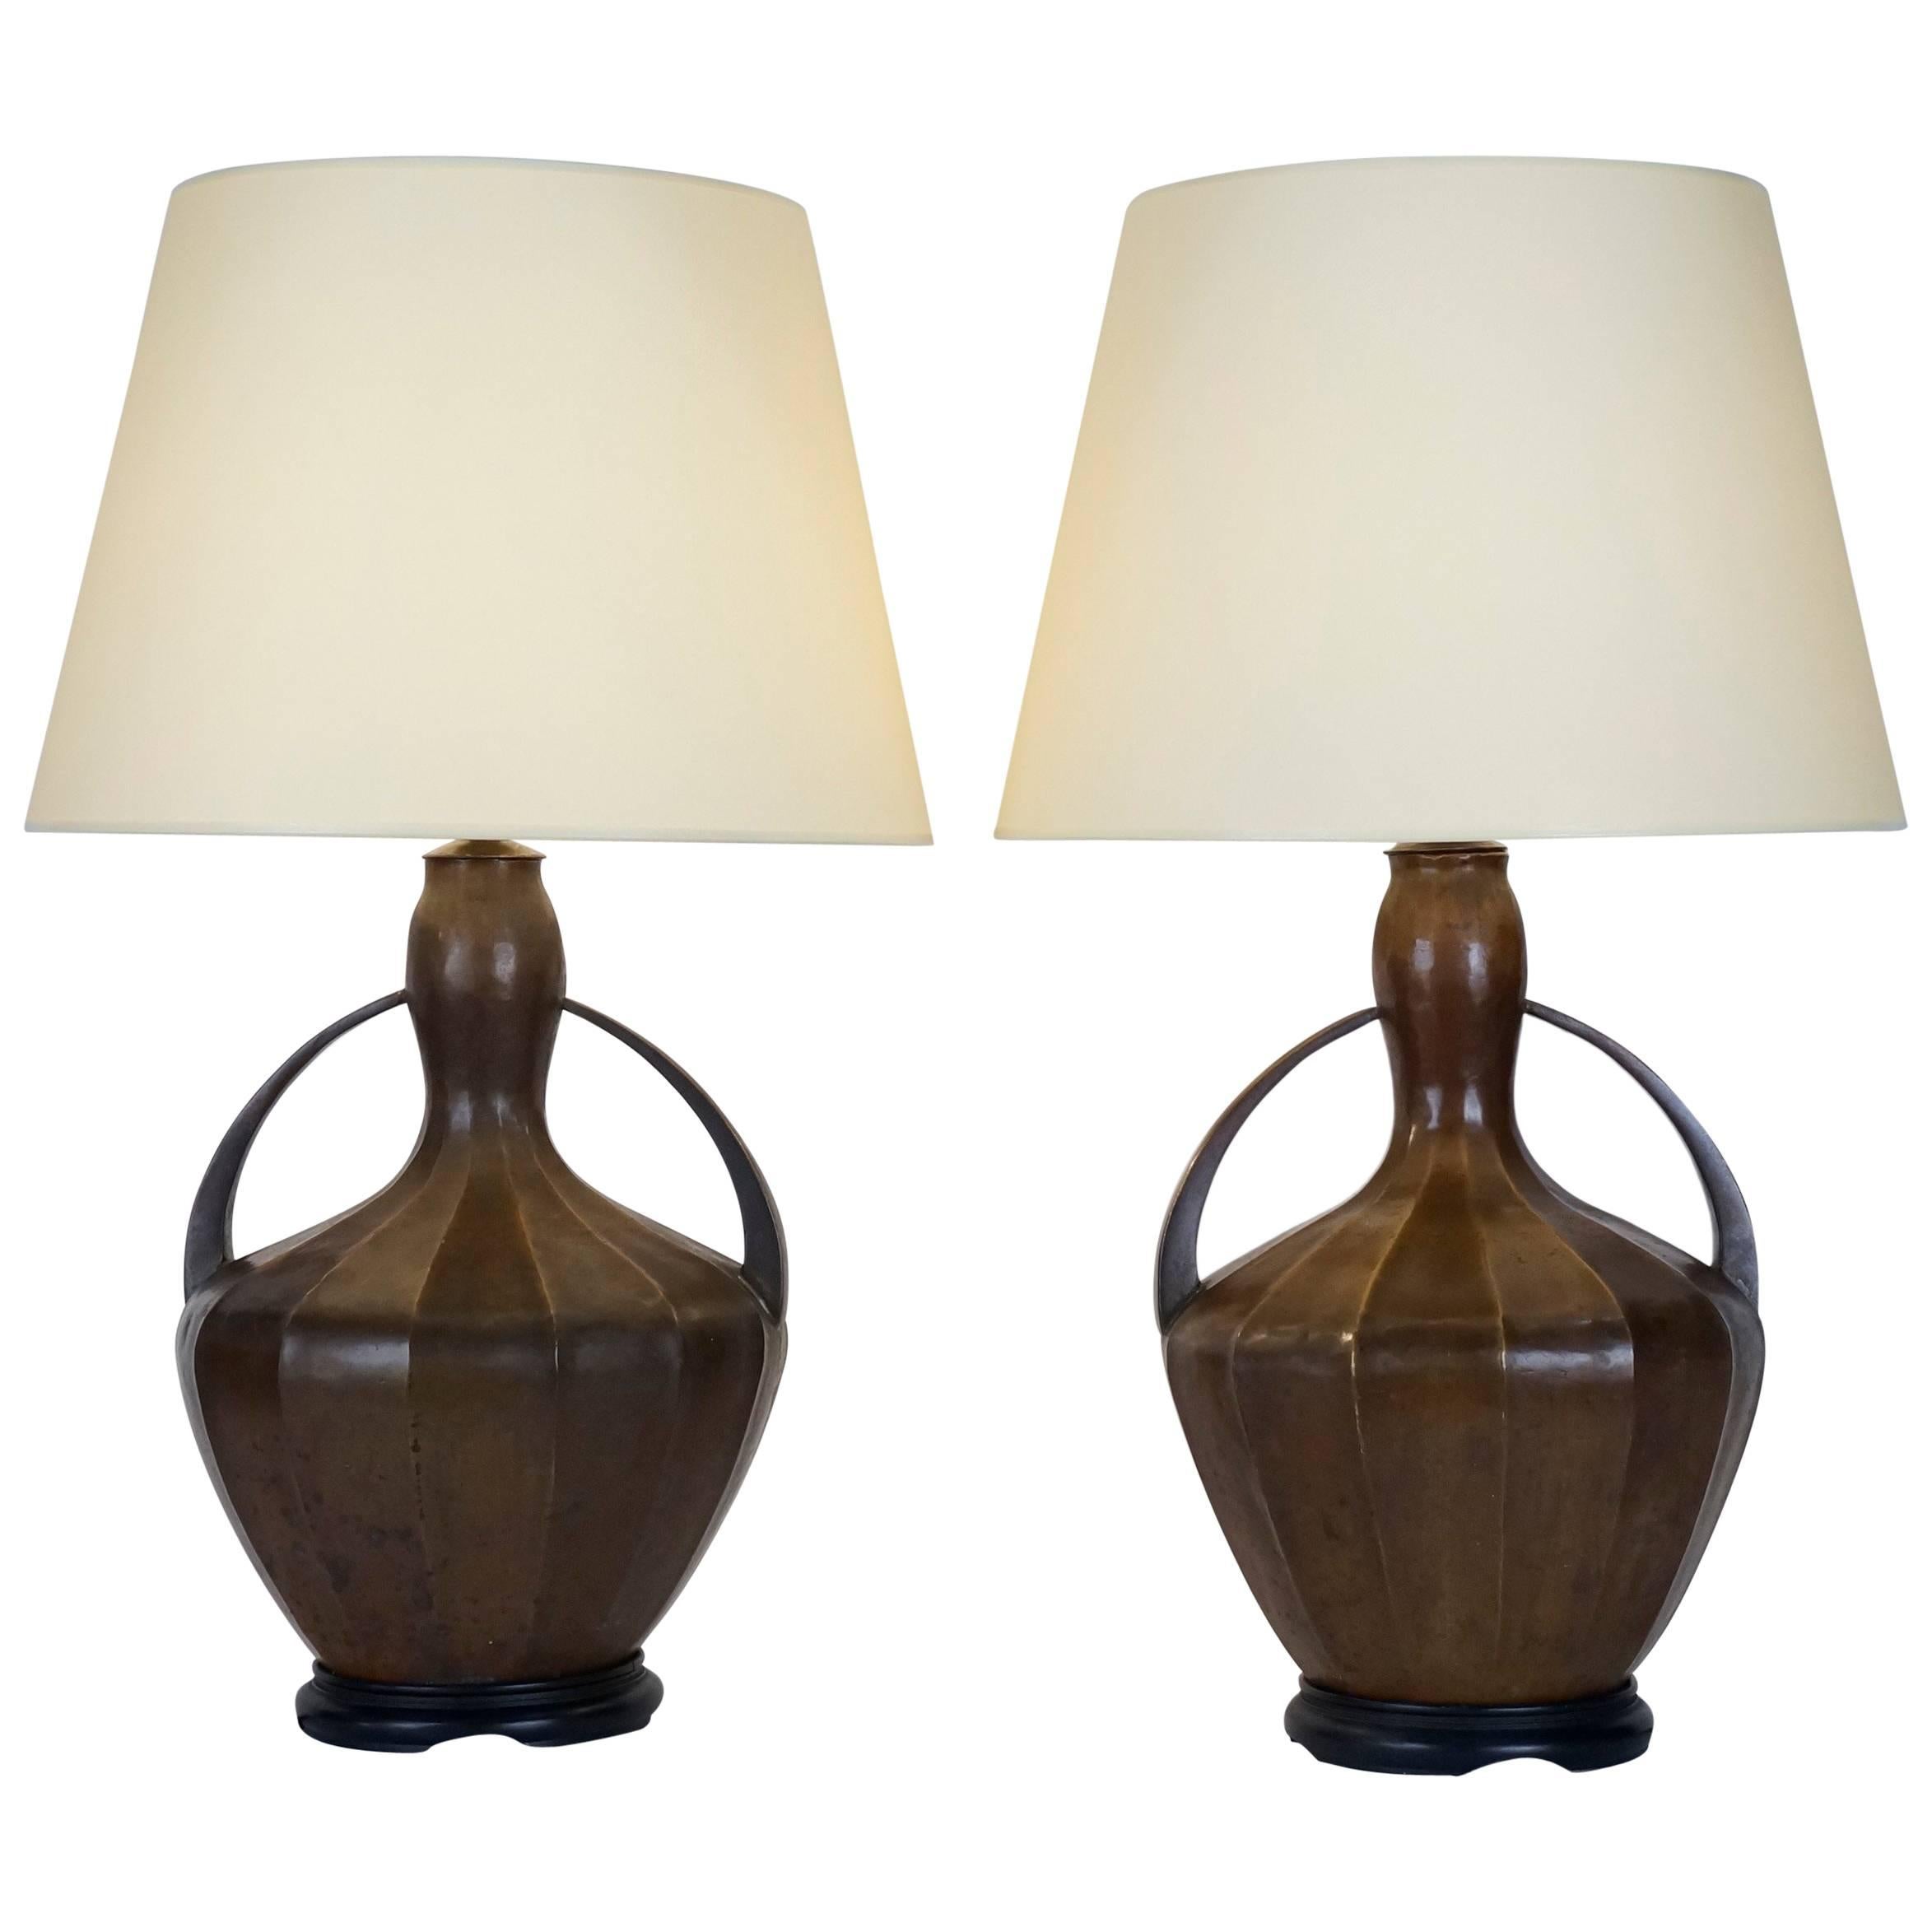 Pair of Early 20th Century Patinated Brass Table Lamps